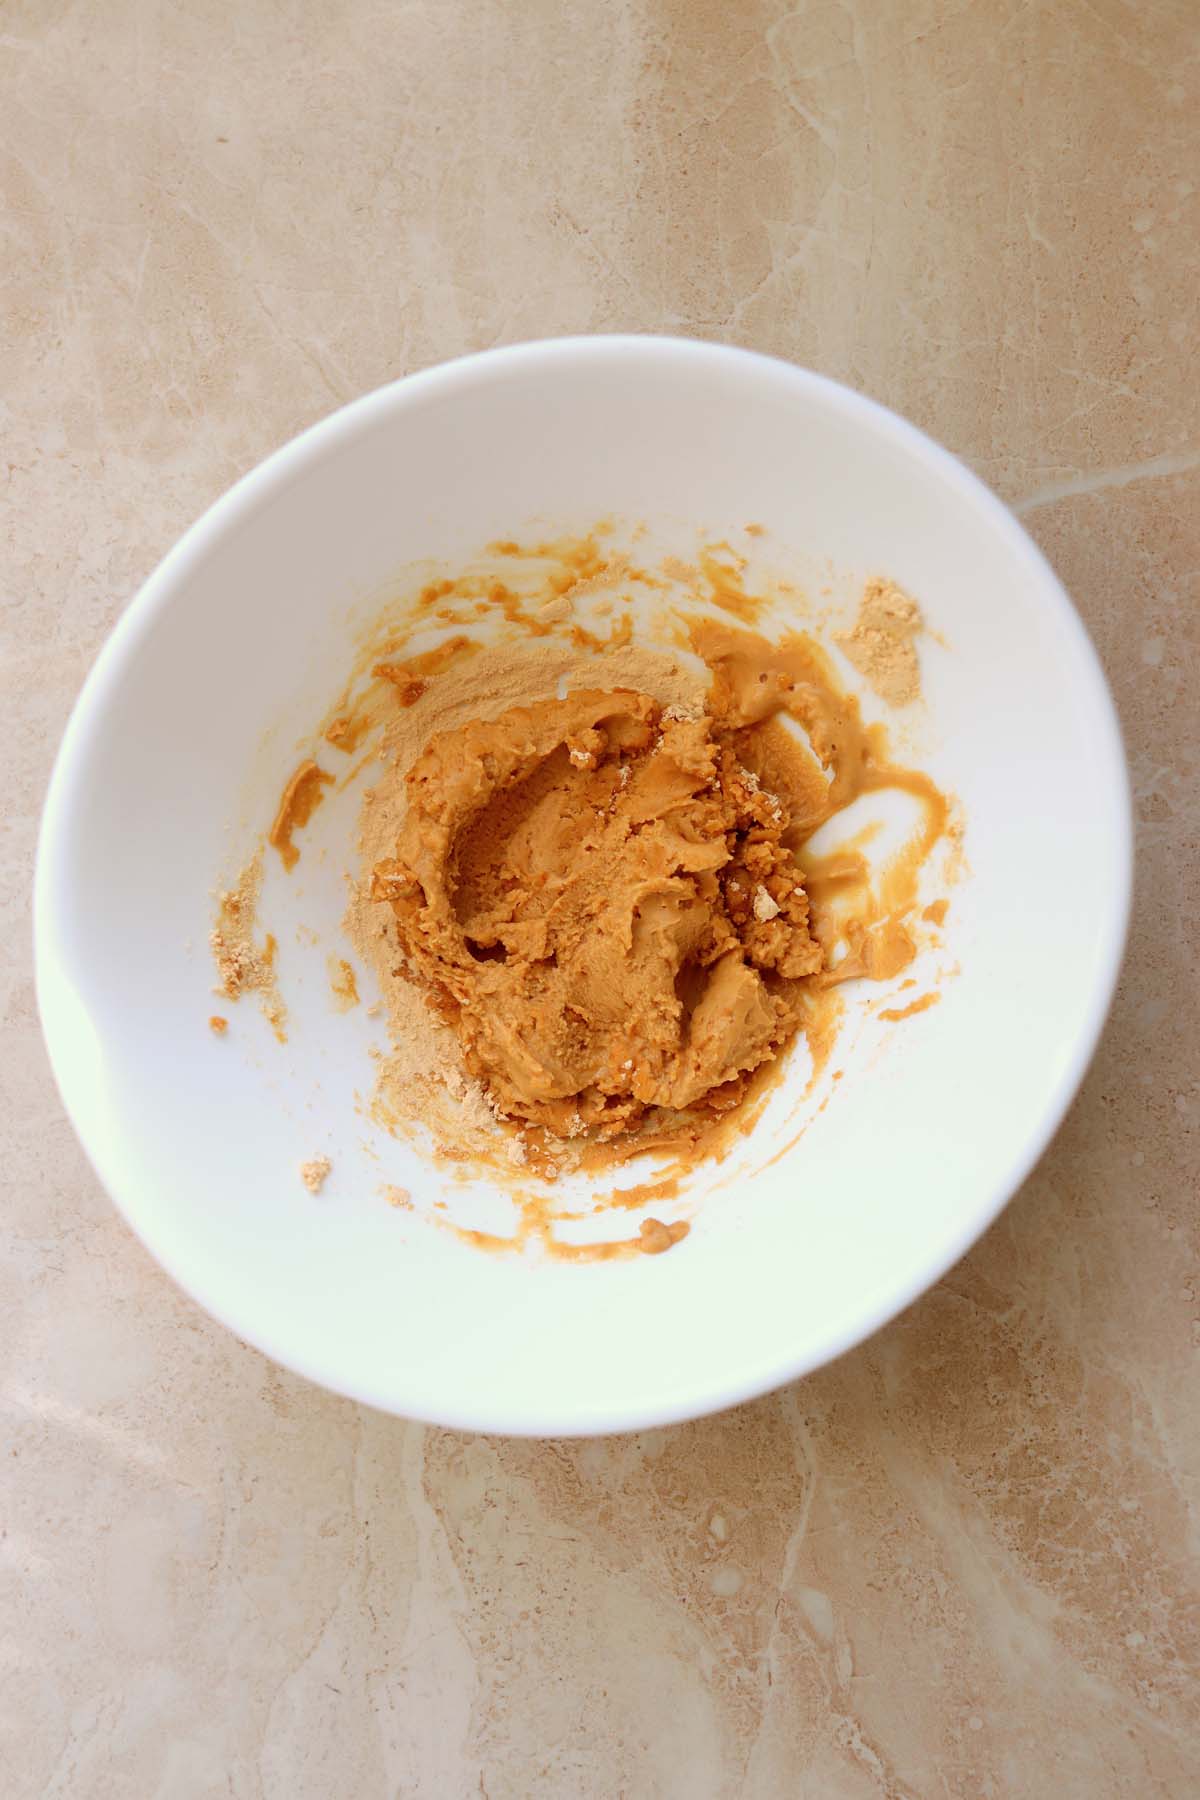 Peanut butter powder and water mixed together.